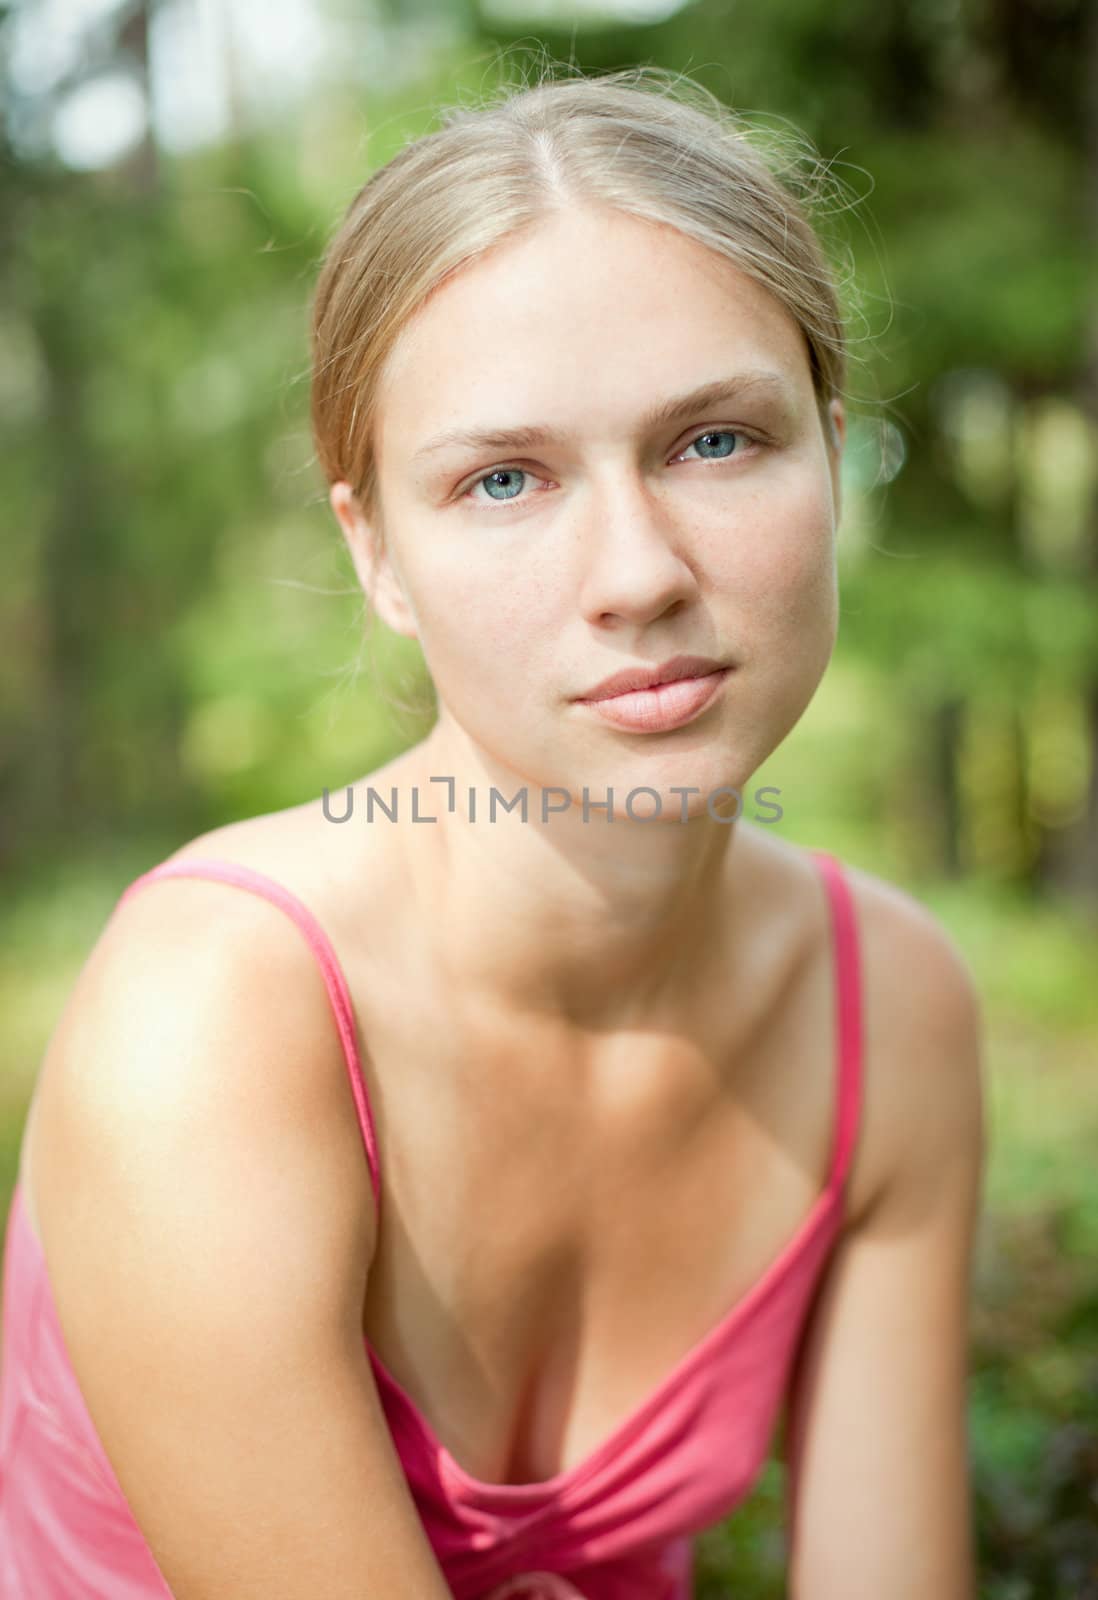 Outdoor portrait of a young caucasian female